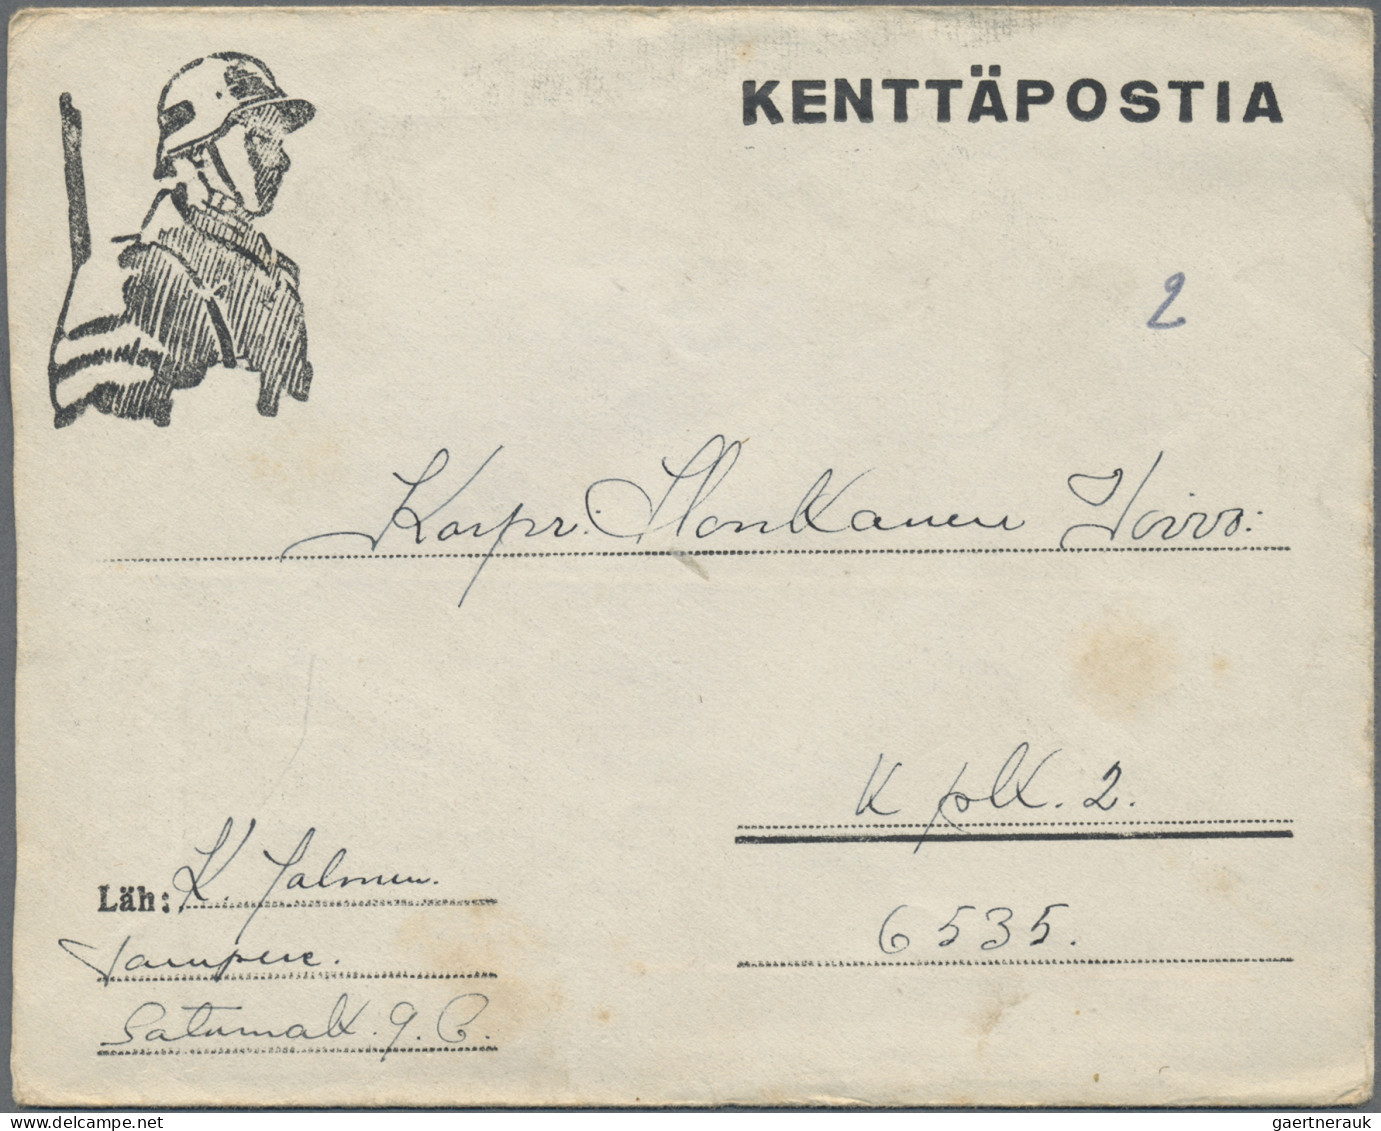 Finland: 1941/1990 (ca), around 250 Finnish Fieldpost from WWII with a wide rang